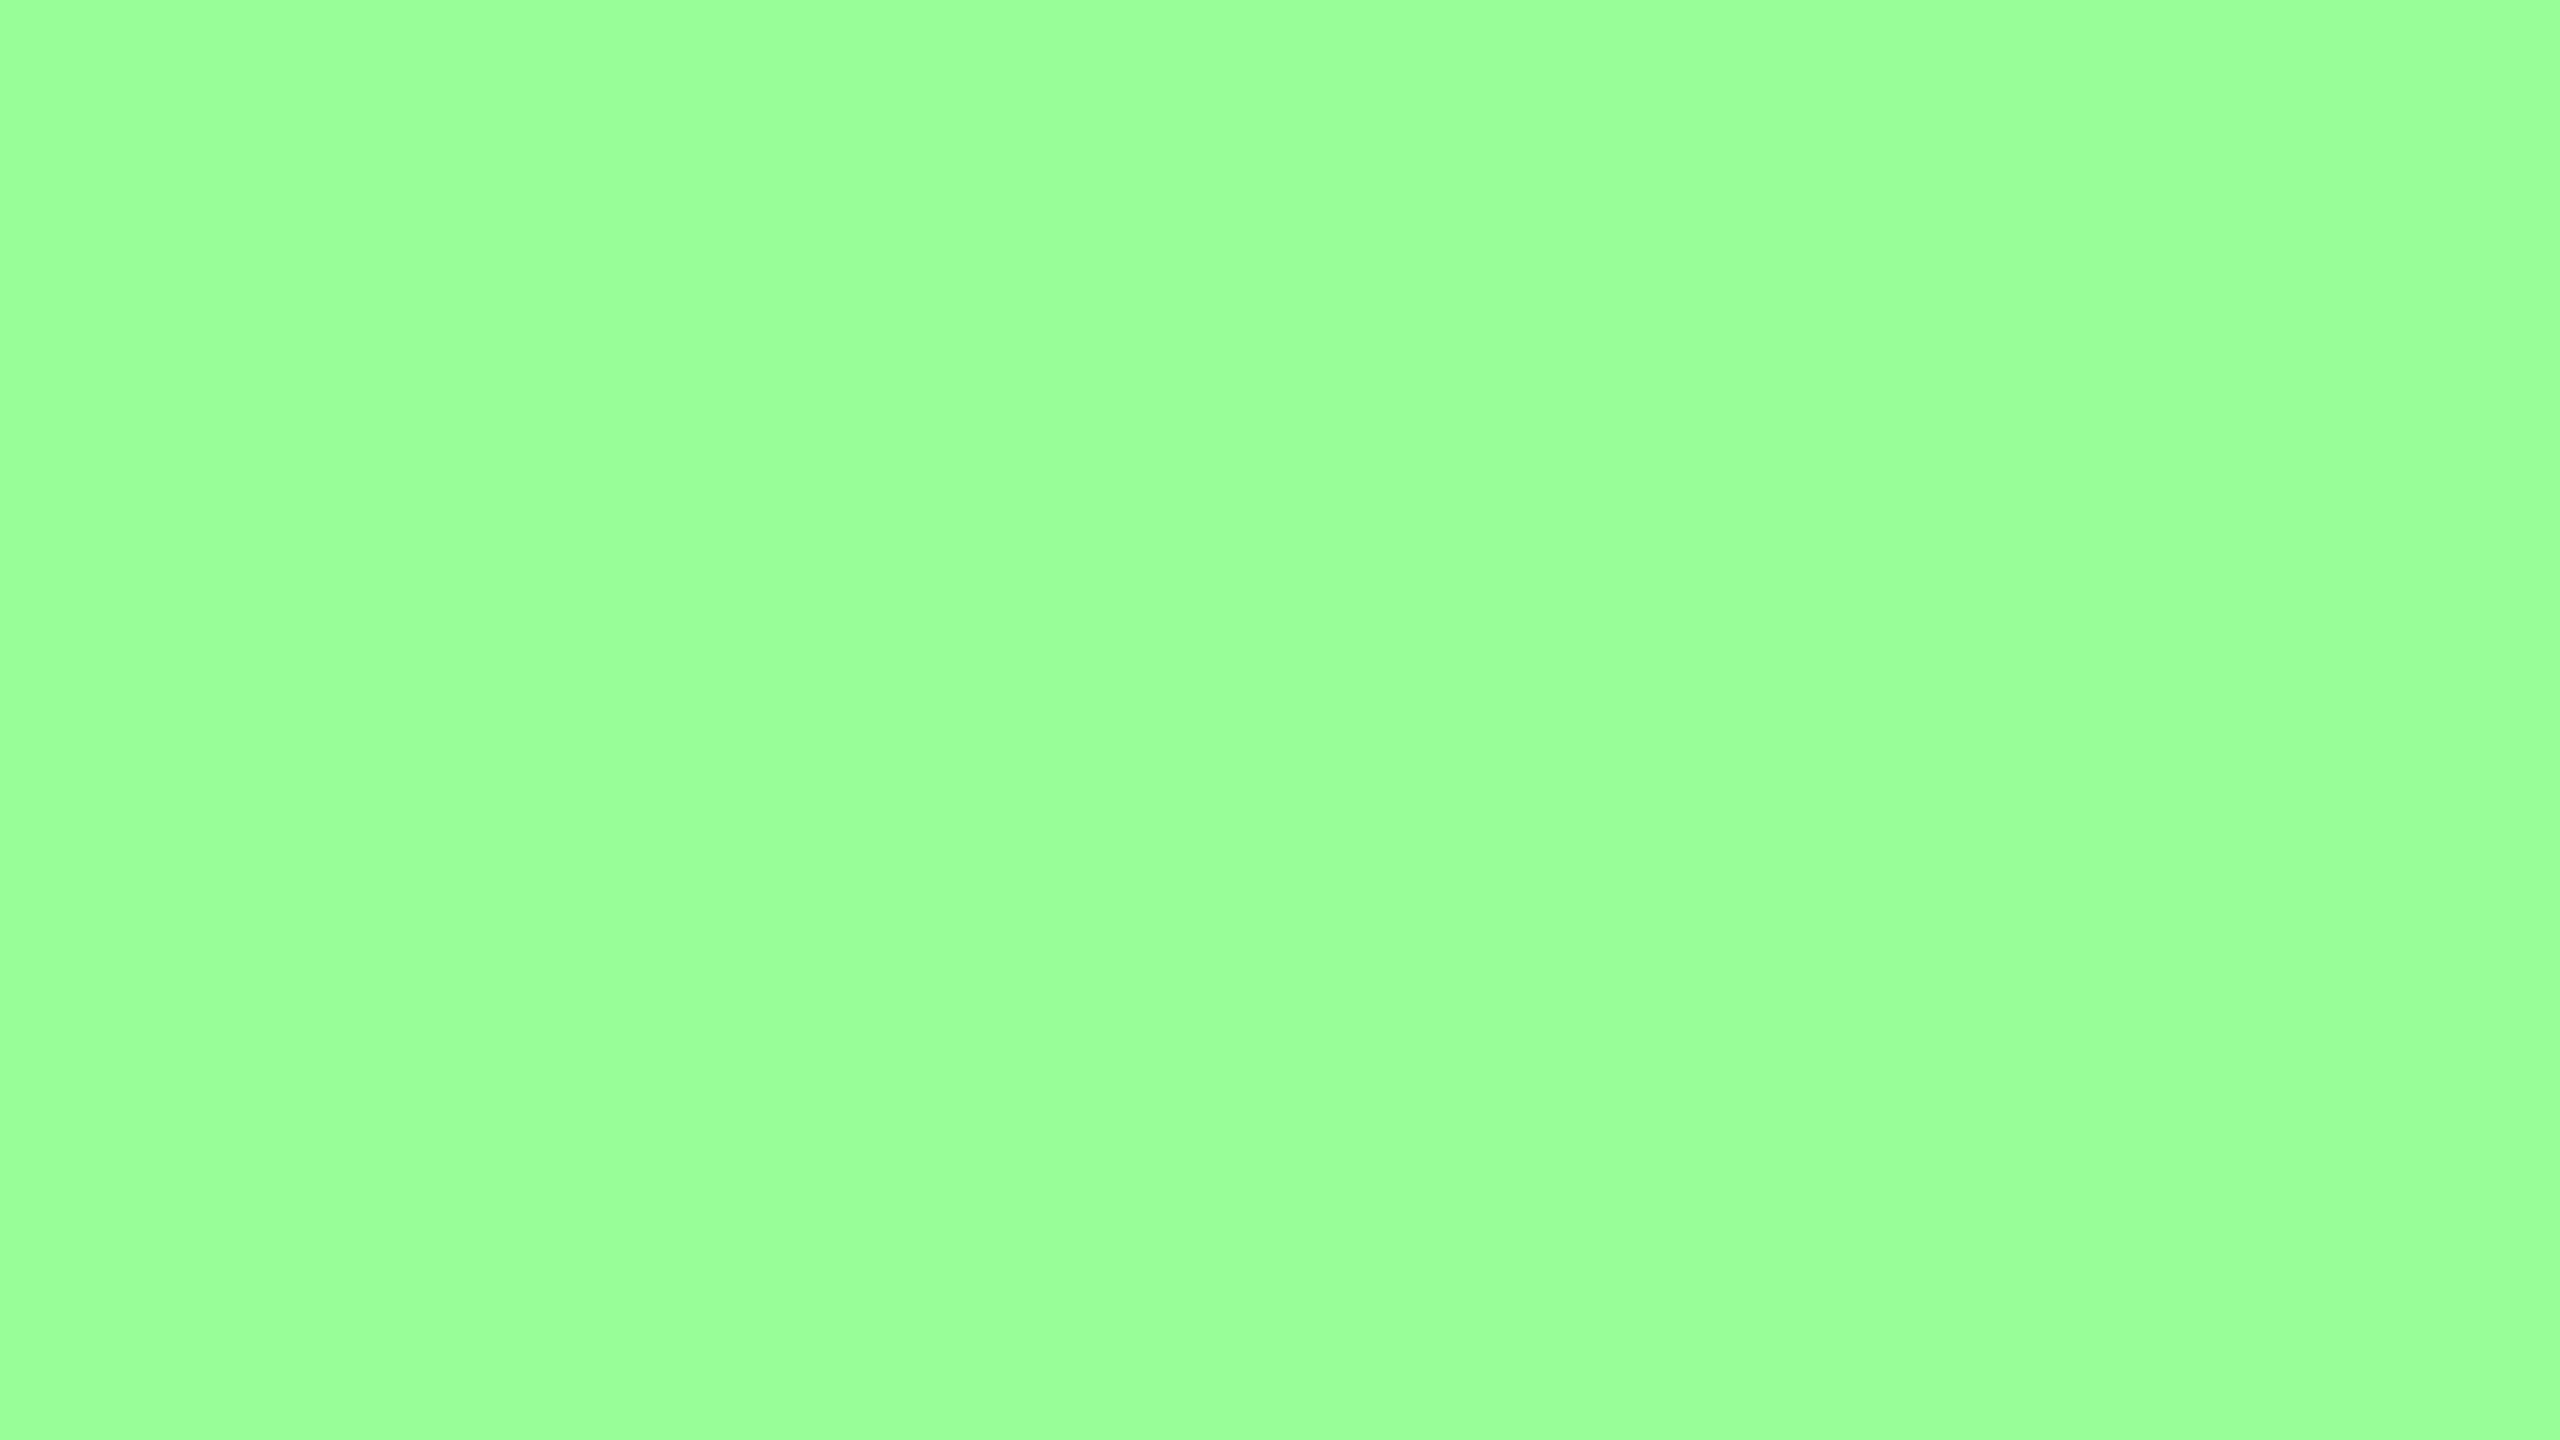 2560x1440 Mint Green Solid Color Background